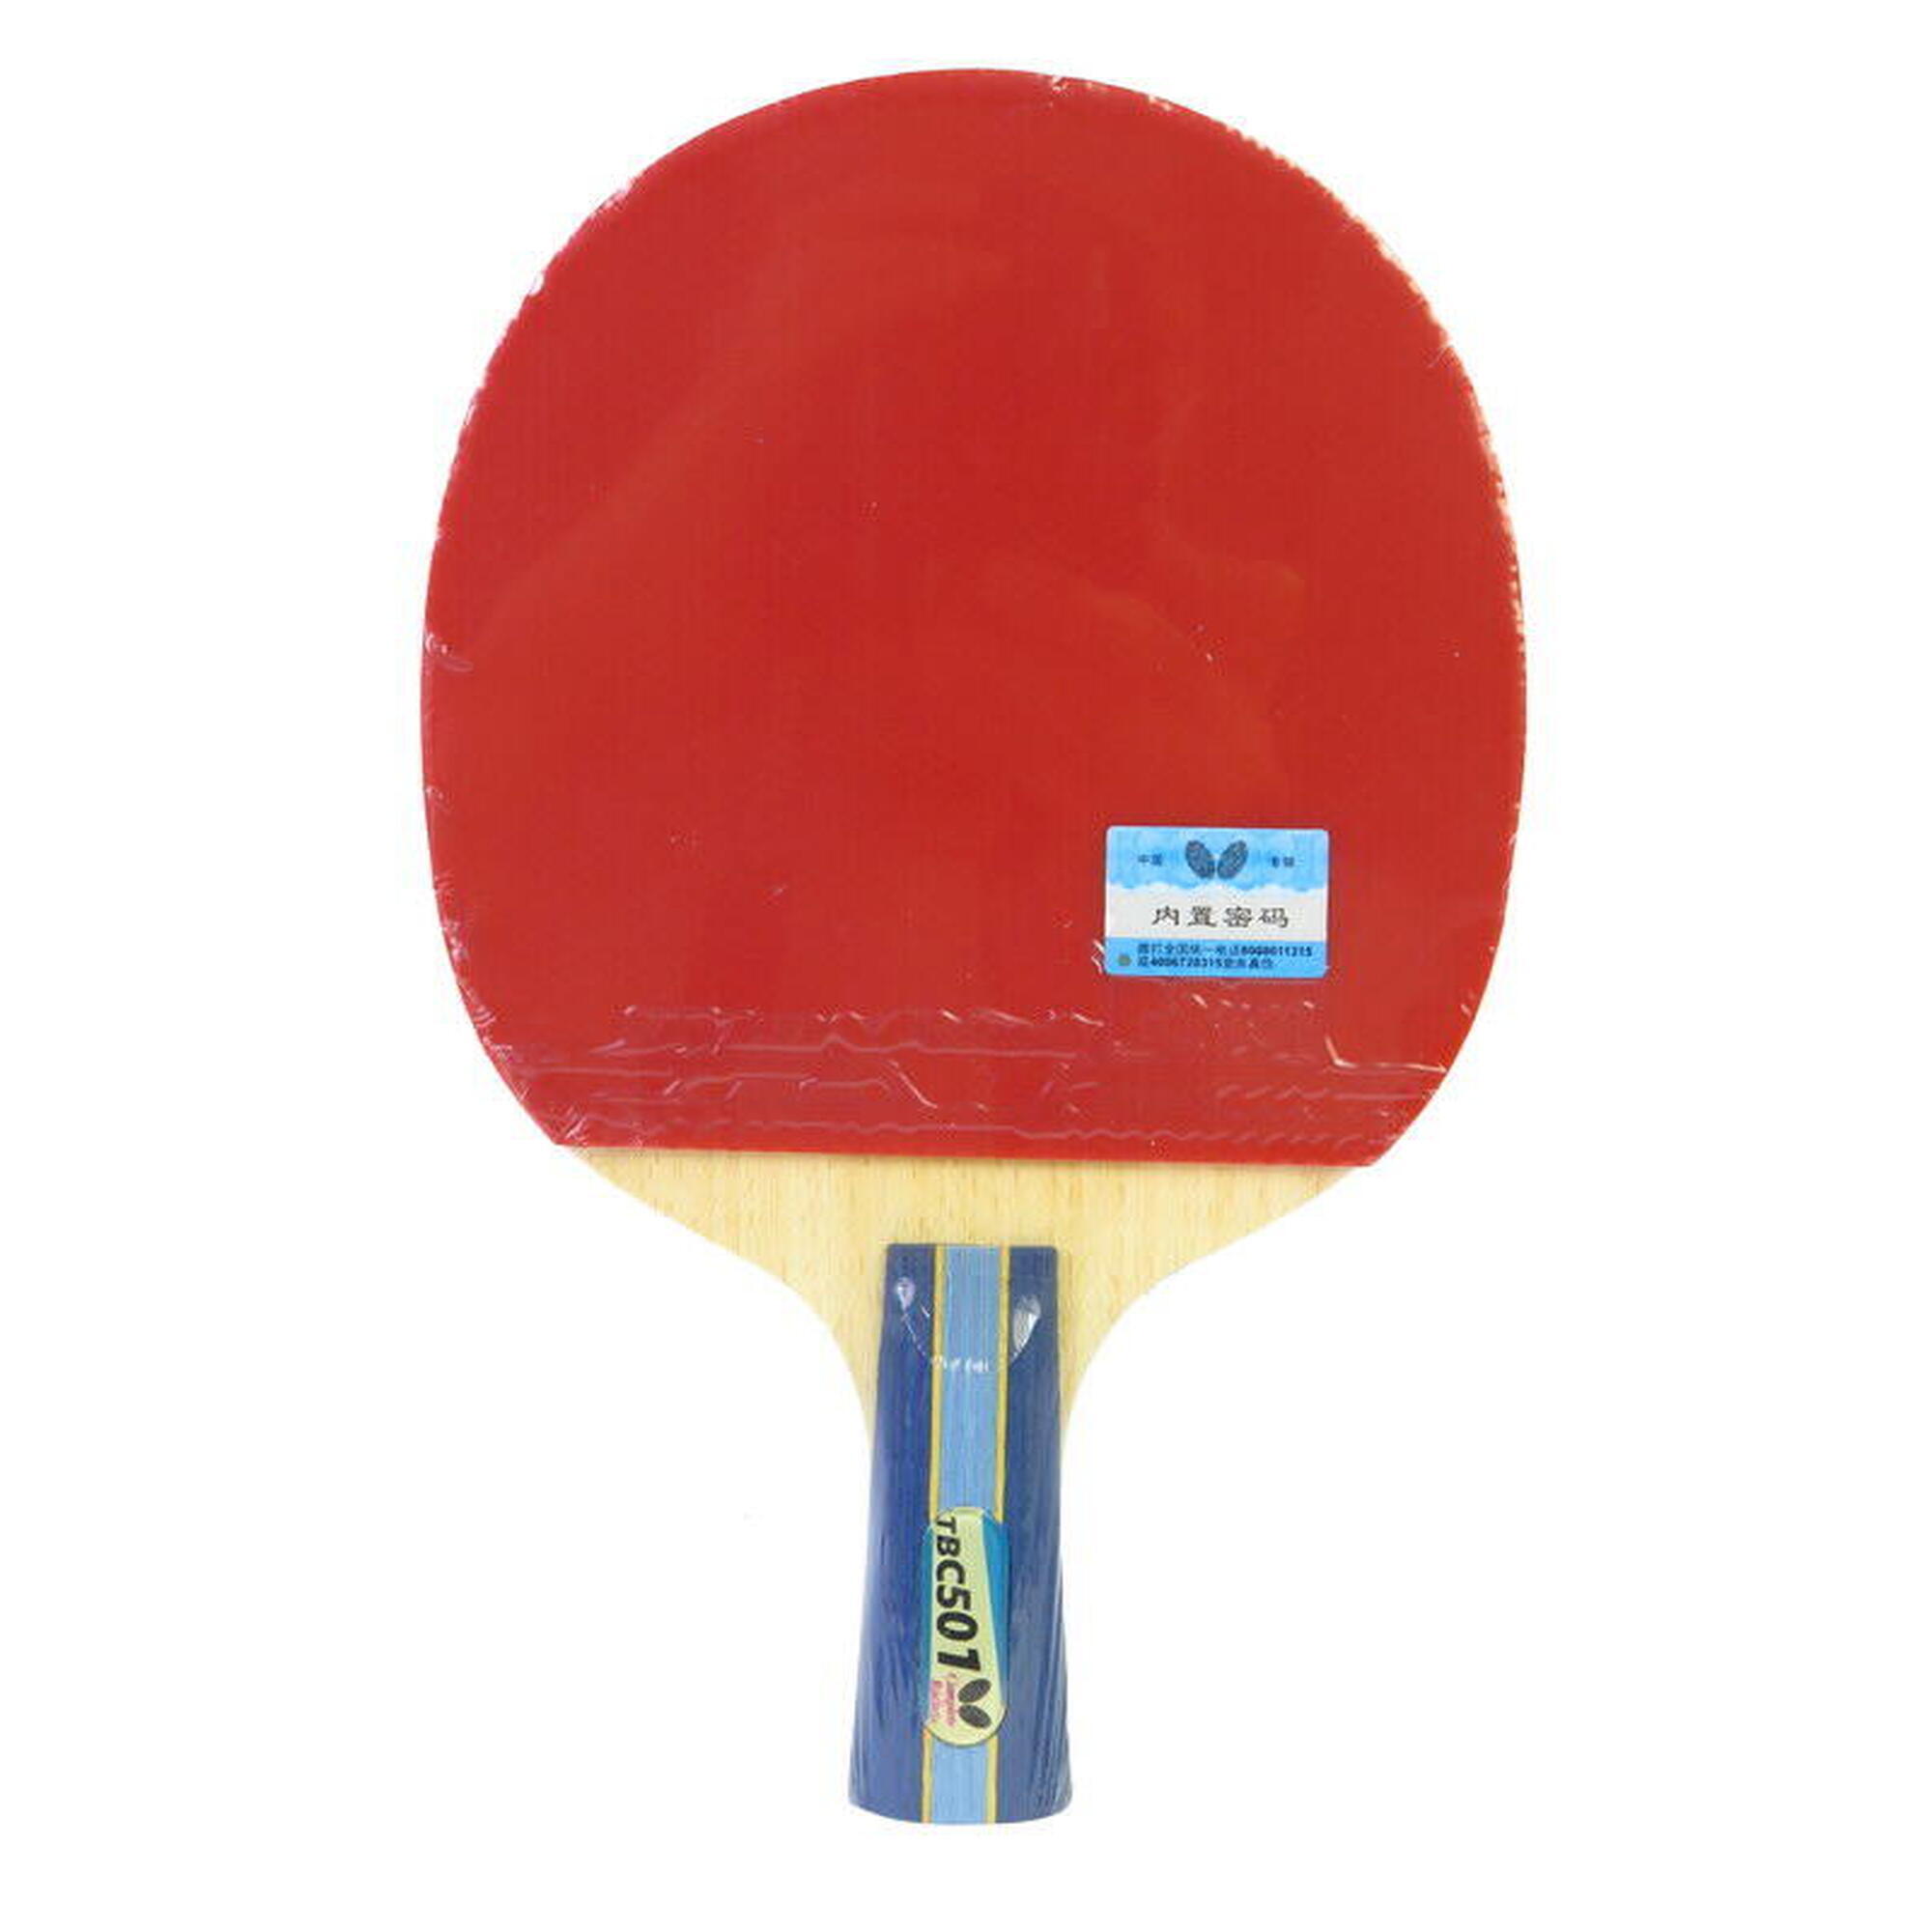 Butterfly 5 Series - In two-sidesTable Tennis Racket (Short Handle)